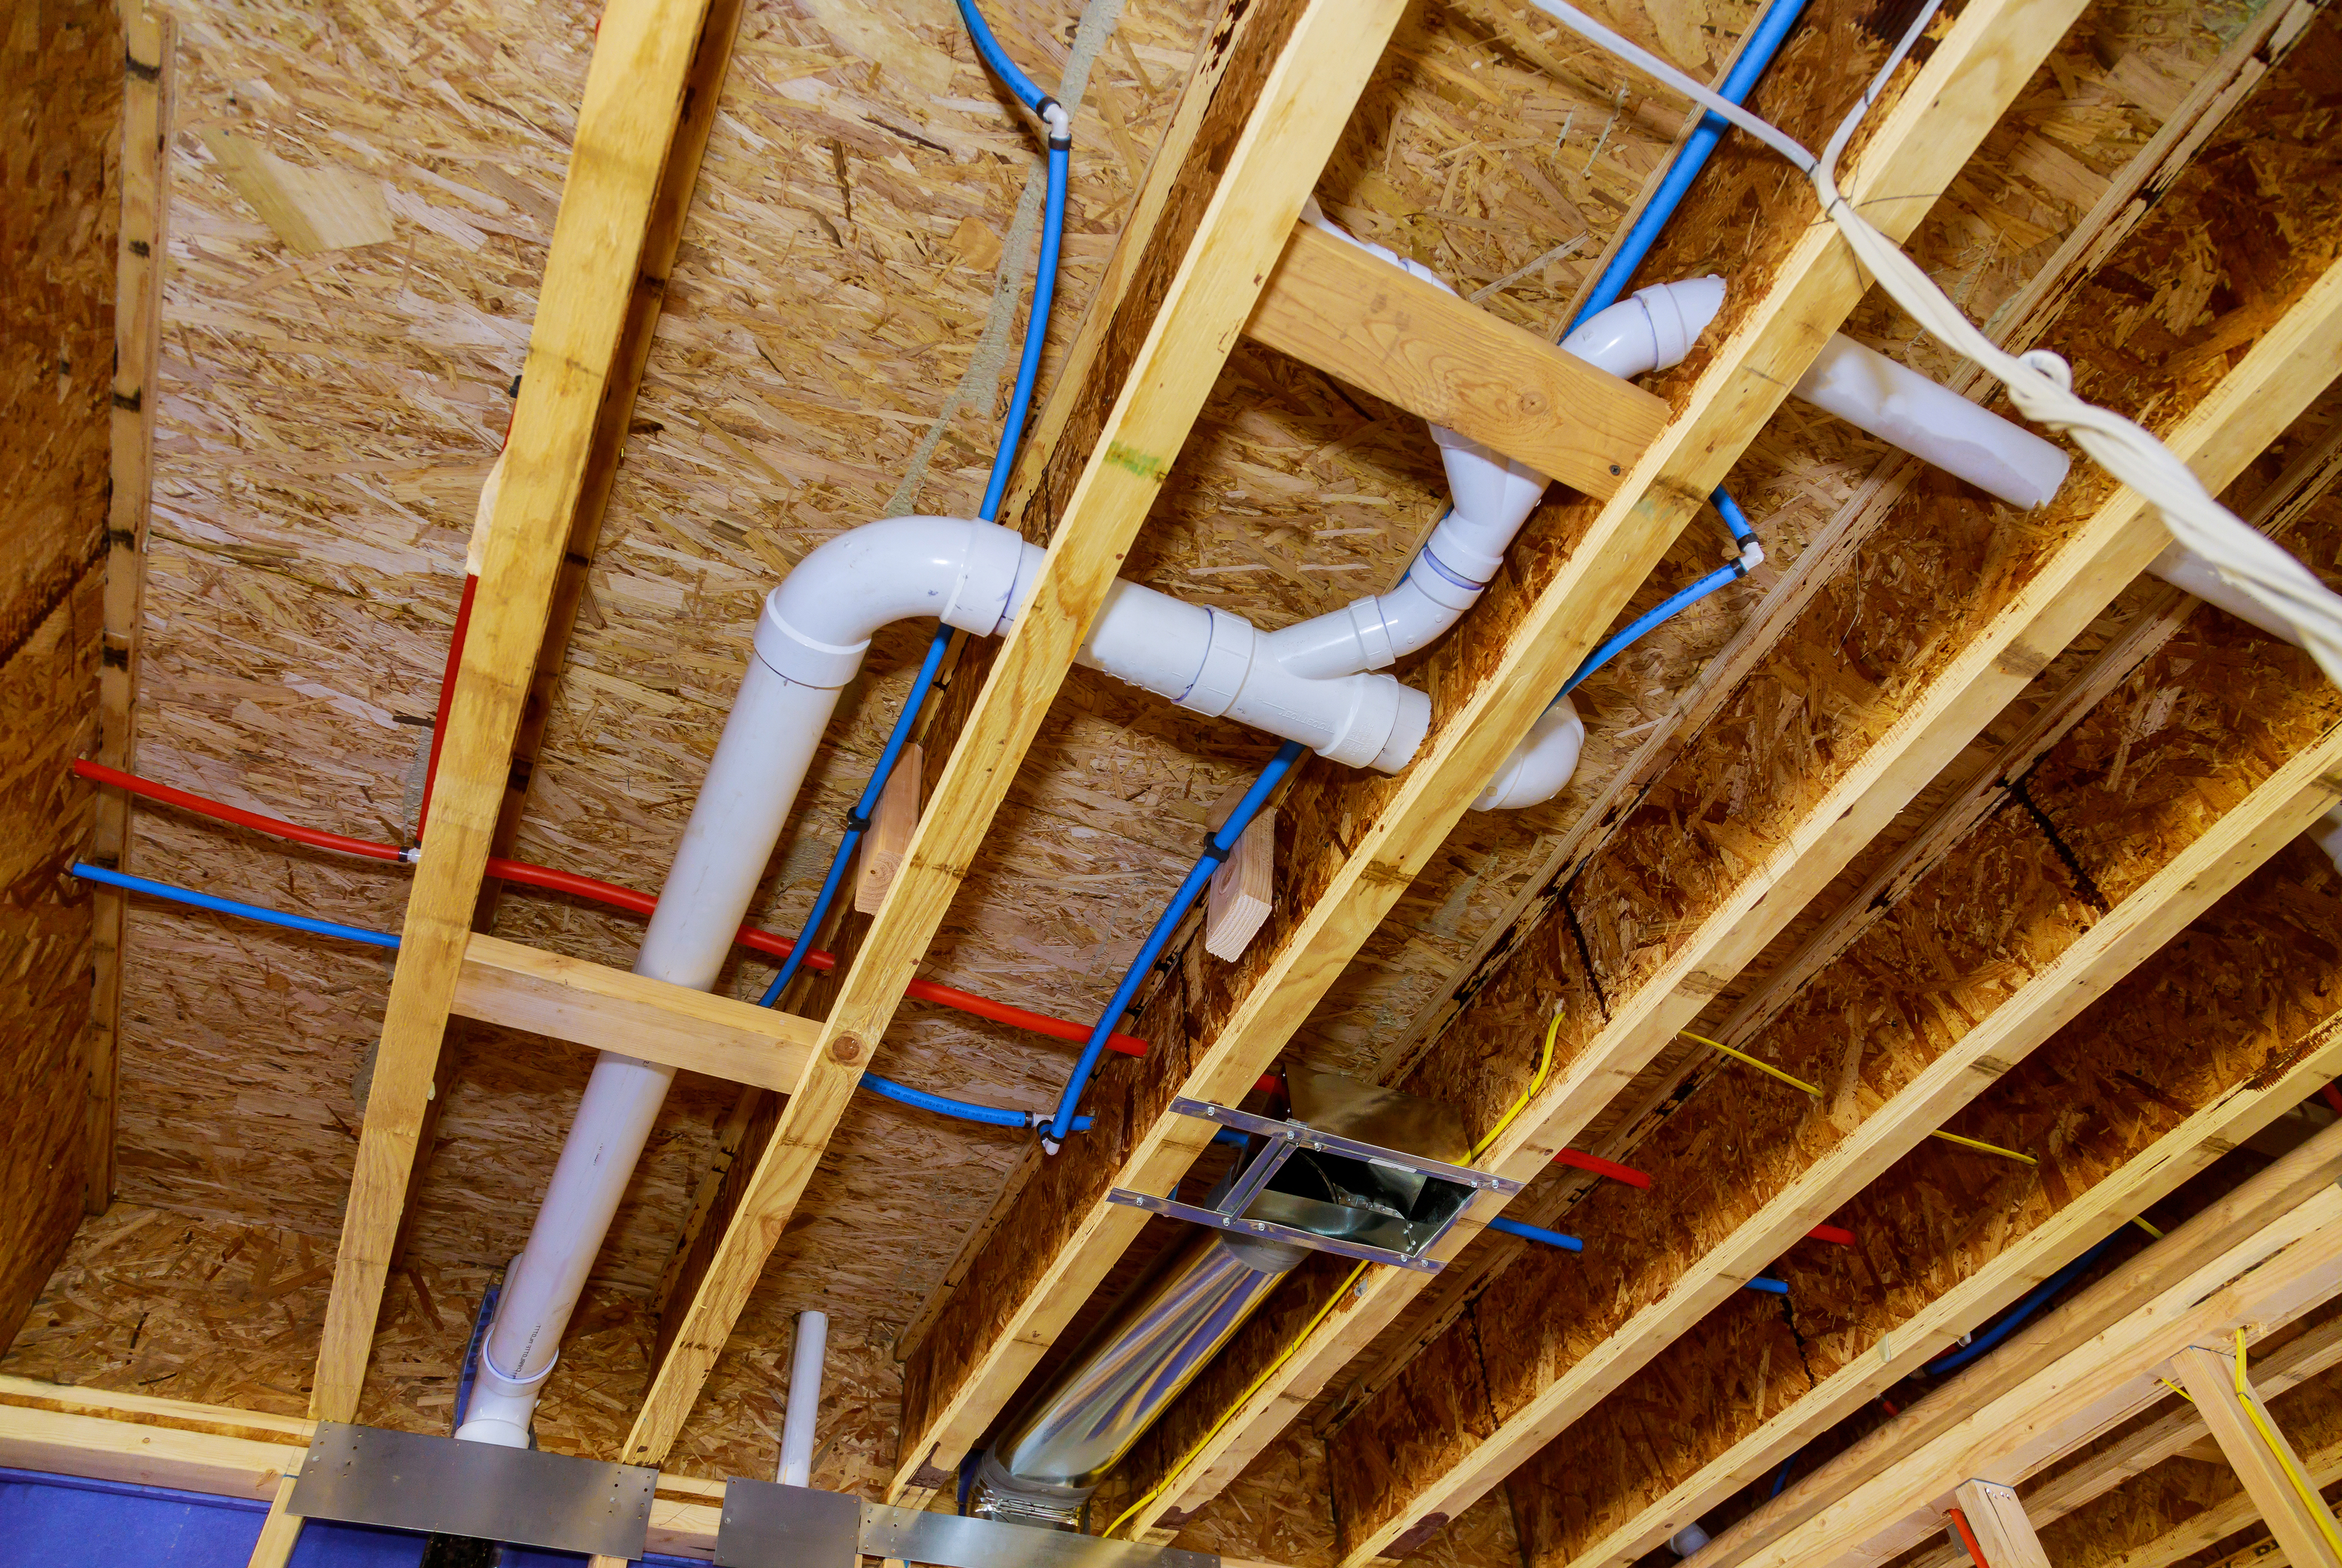 An exposed basement ceiling showing plumbing and electrical wiring installed among wooden beams and panels